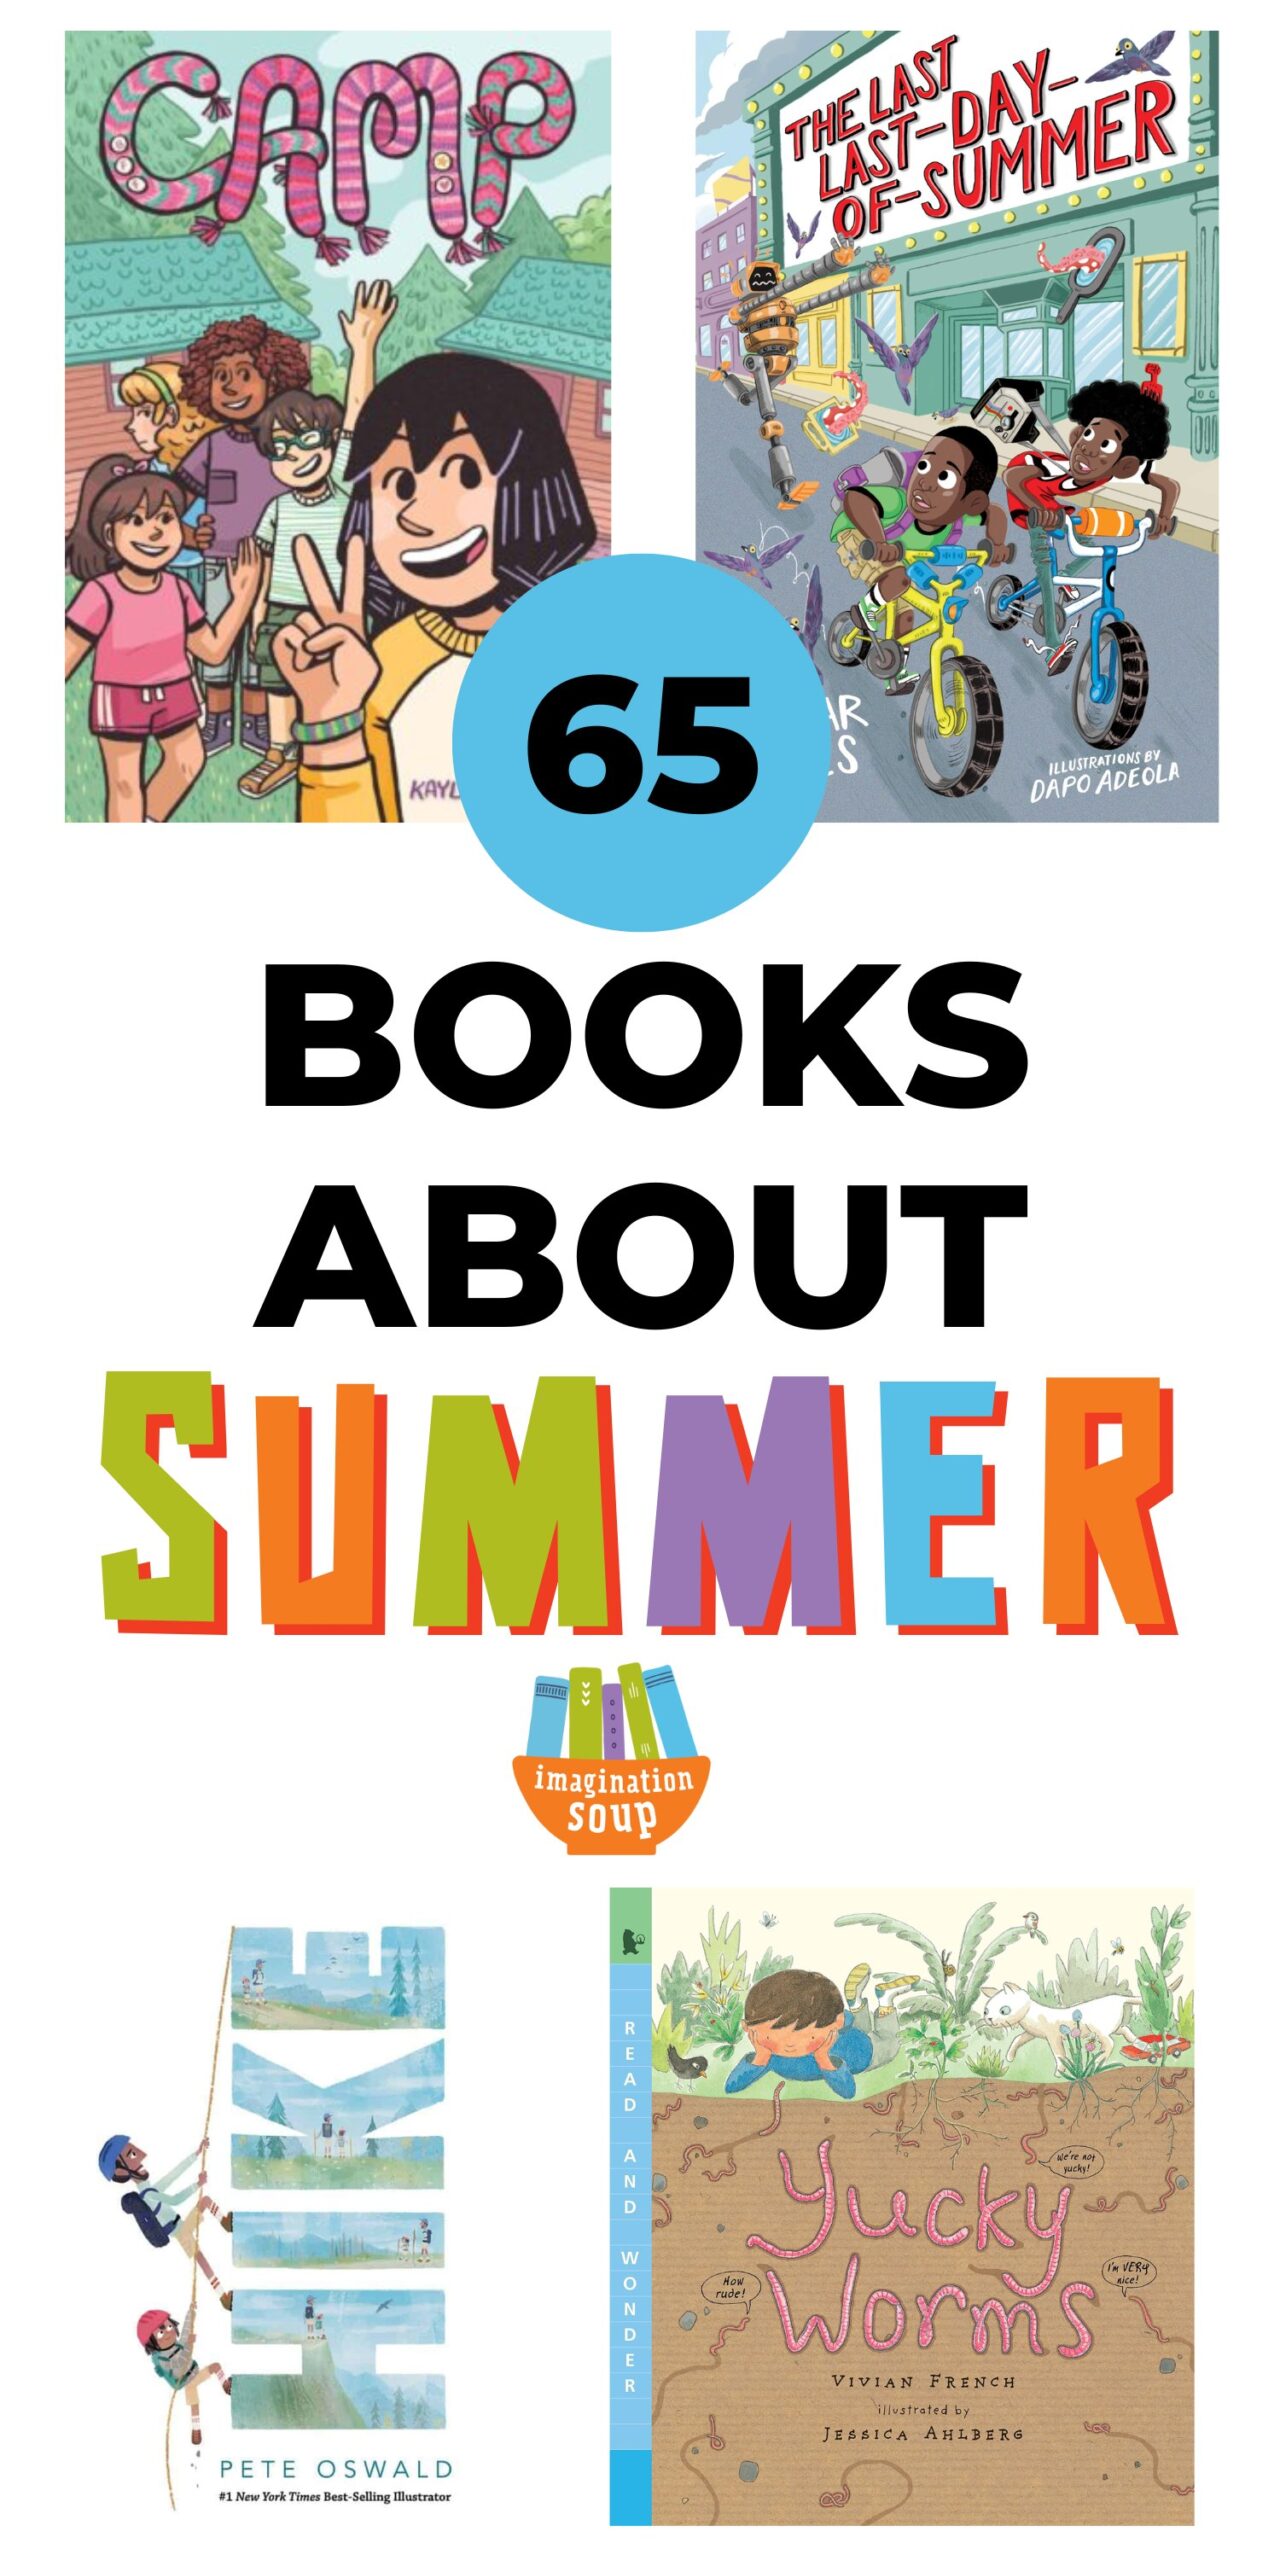 Get ready for summer by reading children's books, picture books, chapter books, and middle grade books, about summer. You'll read about swimming, the sun, going to the beach, gardening, camping, and more!